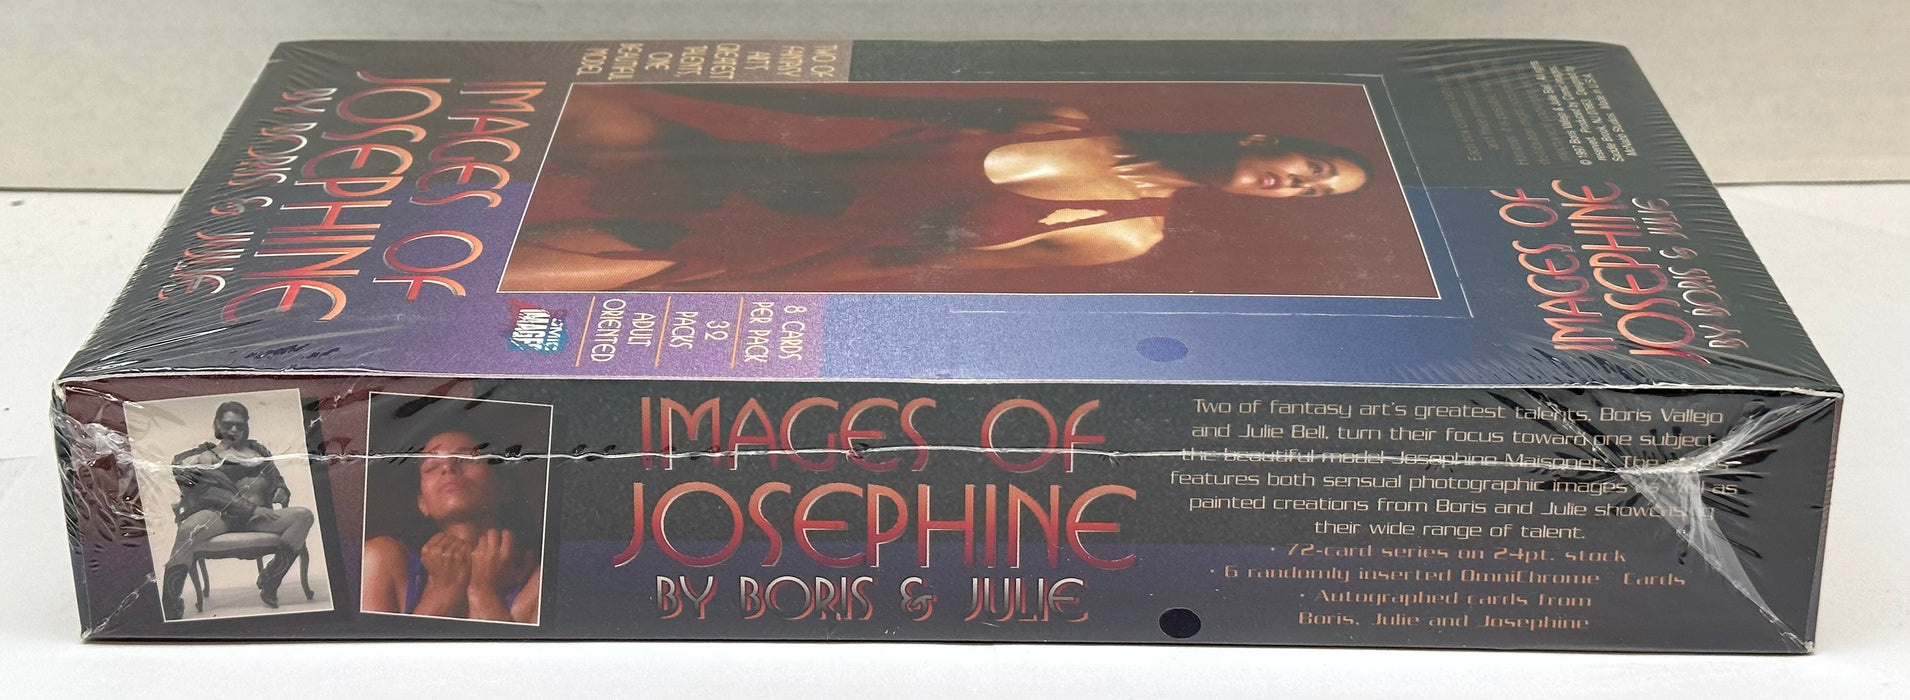 1997 Images of Josephine by Boris & Julie Trading Card Box Comic Images 32 CT   - TvMovieCards.com